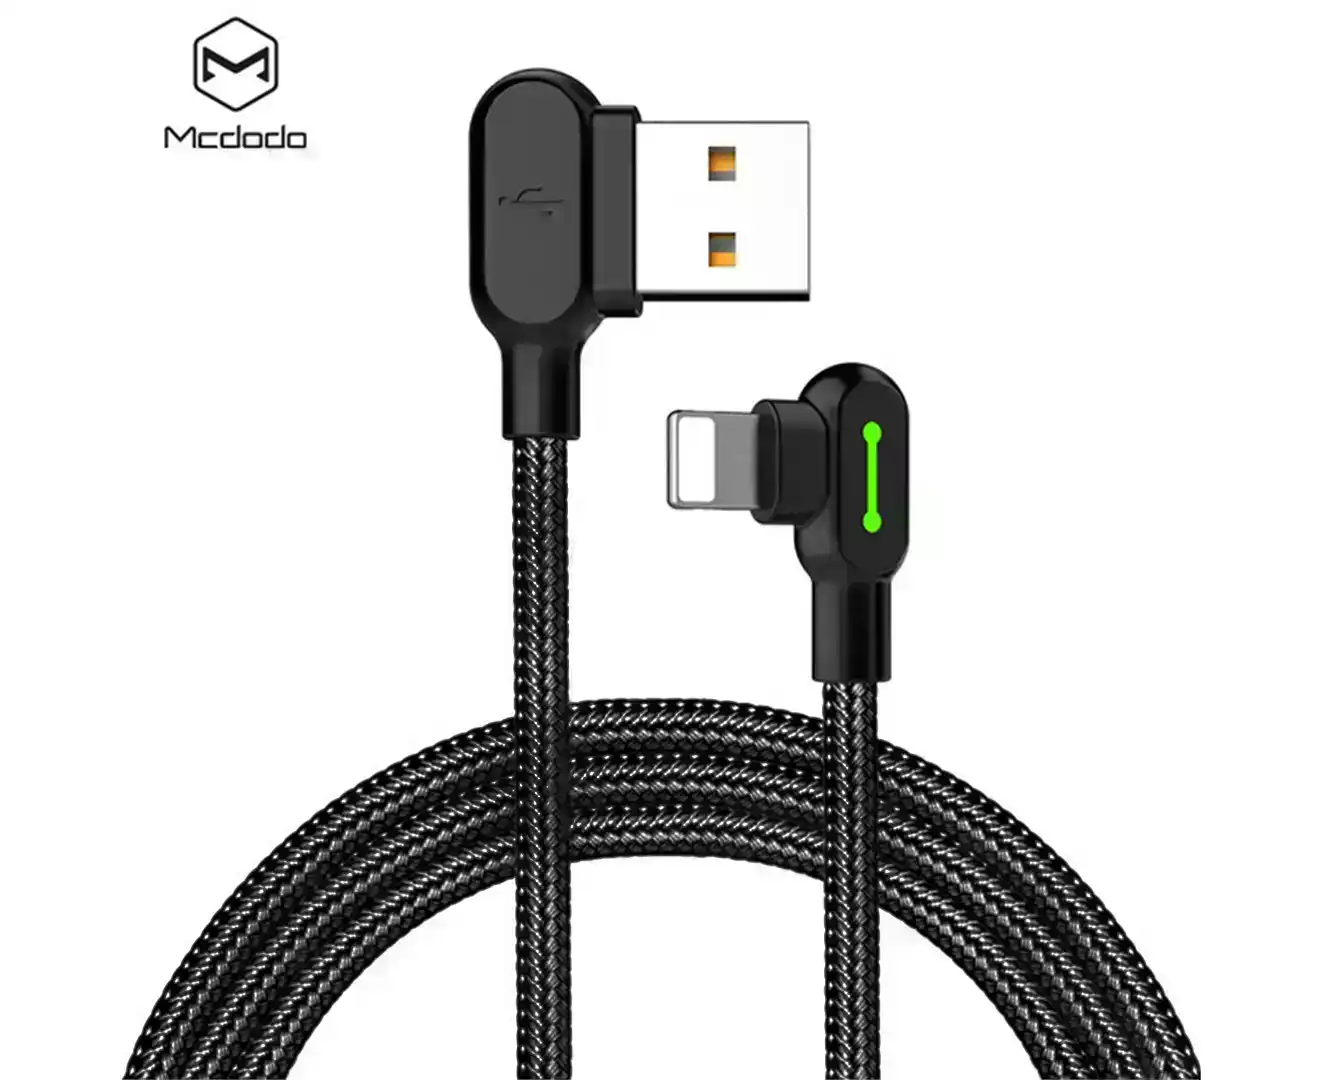 Mcdodo 90 degree usb cable fast charging for iphone